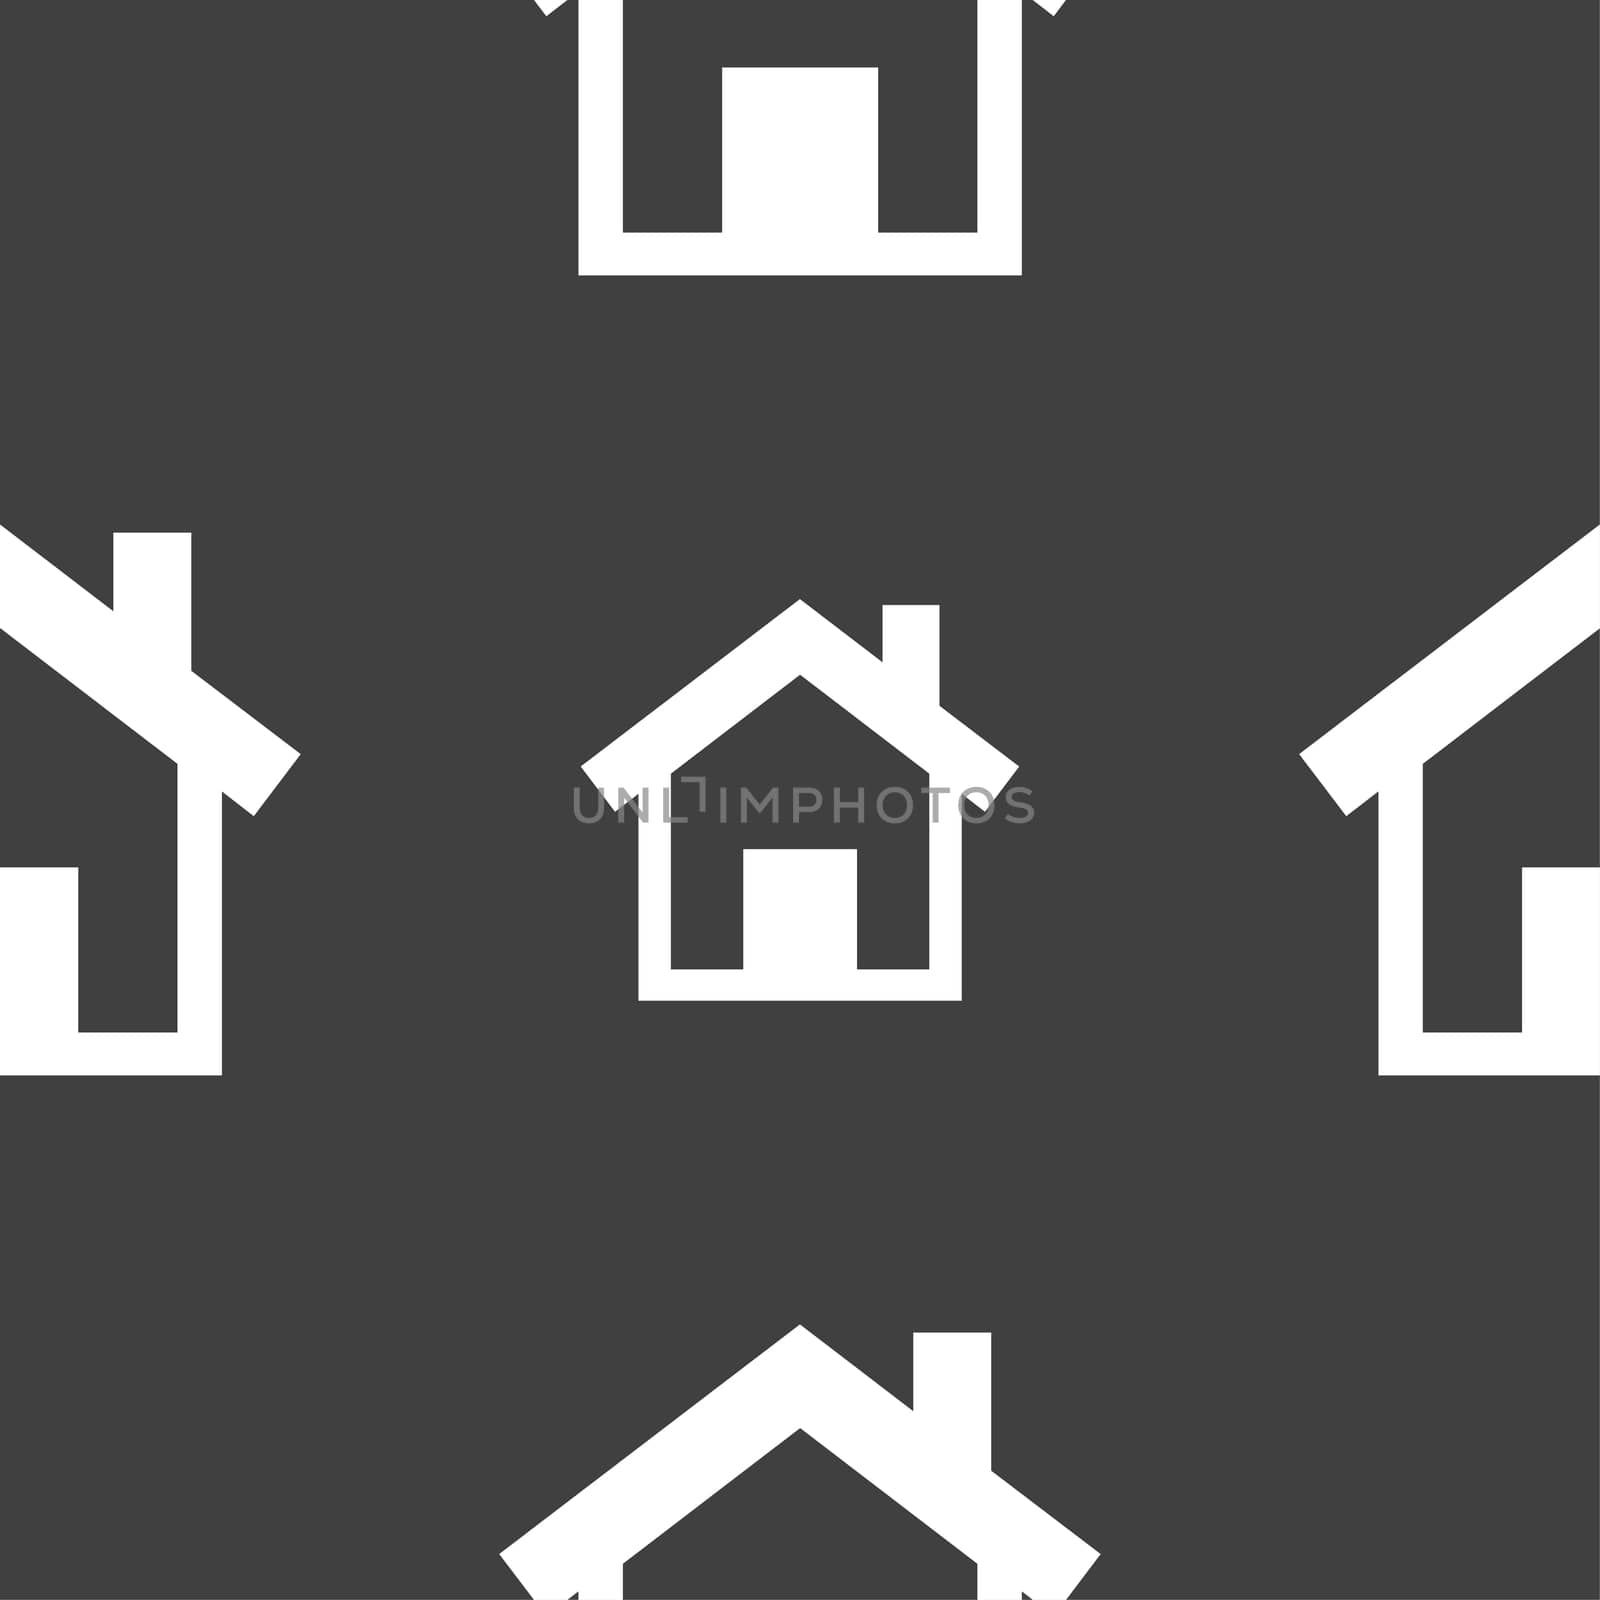 Home sign icon. Main page button. Navigation symbol. Seamless pattern on a gray background. illustration